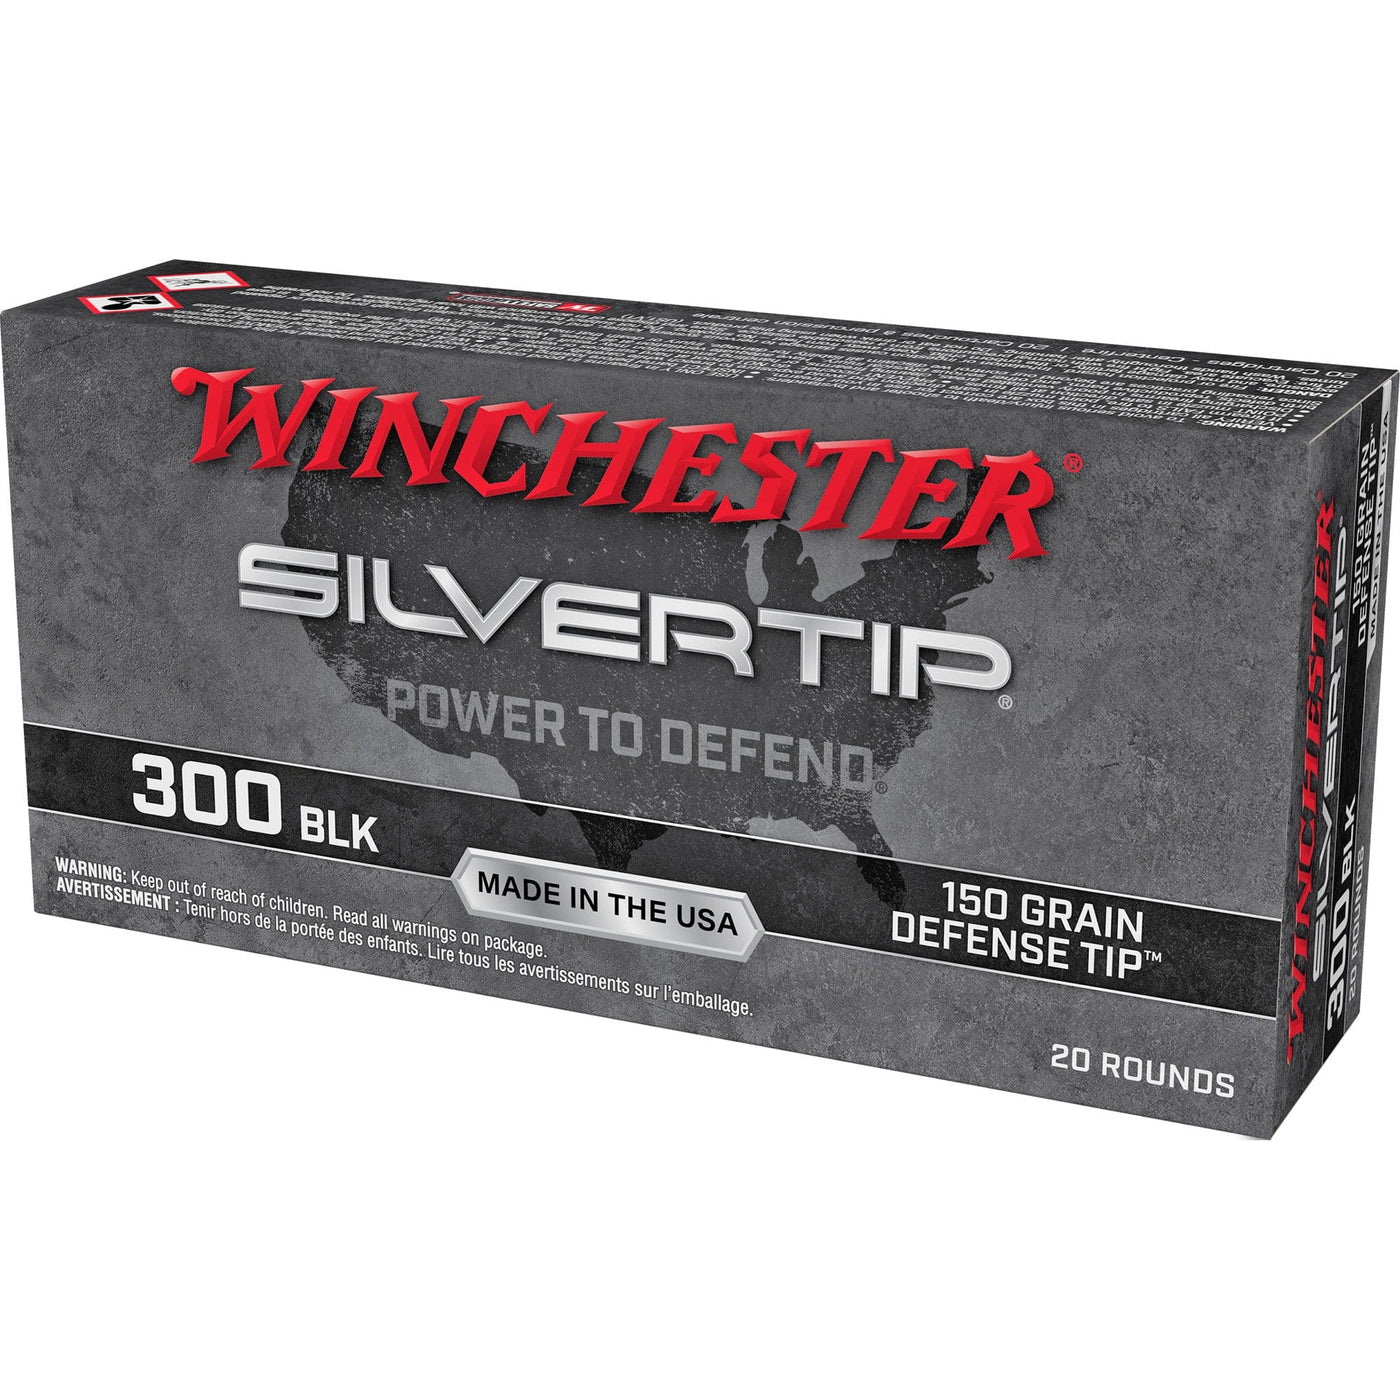 Winchester Ammo Winchester Silvertip Rifle Ammo 300 Blackout 150 Gr. Defense Tip 20 Rd. 300blk Ammo